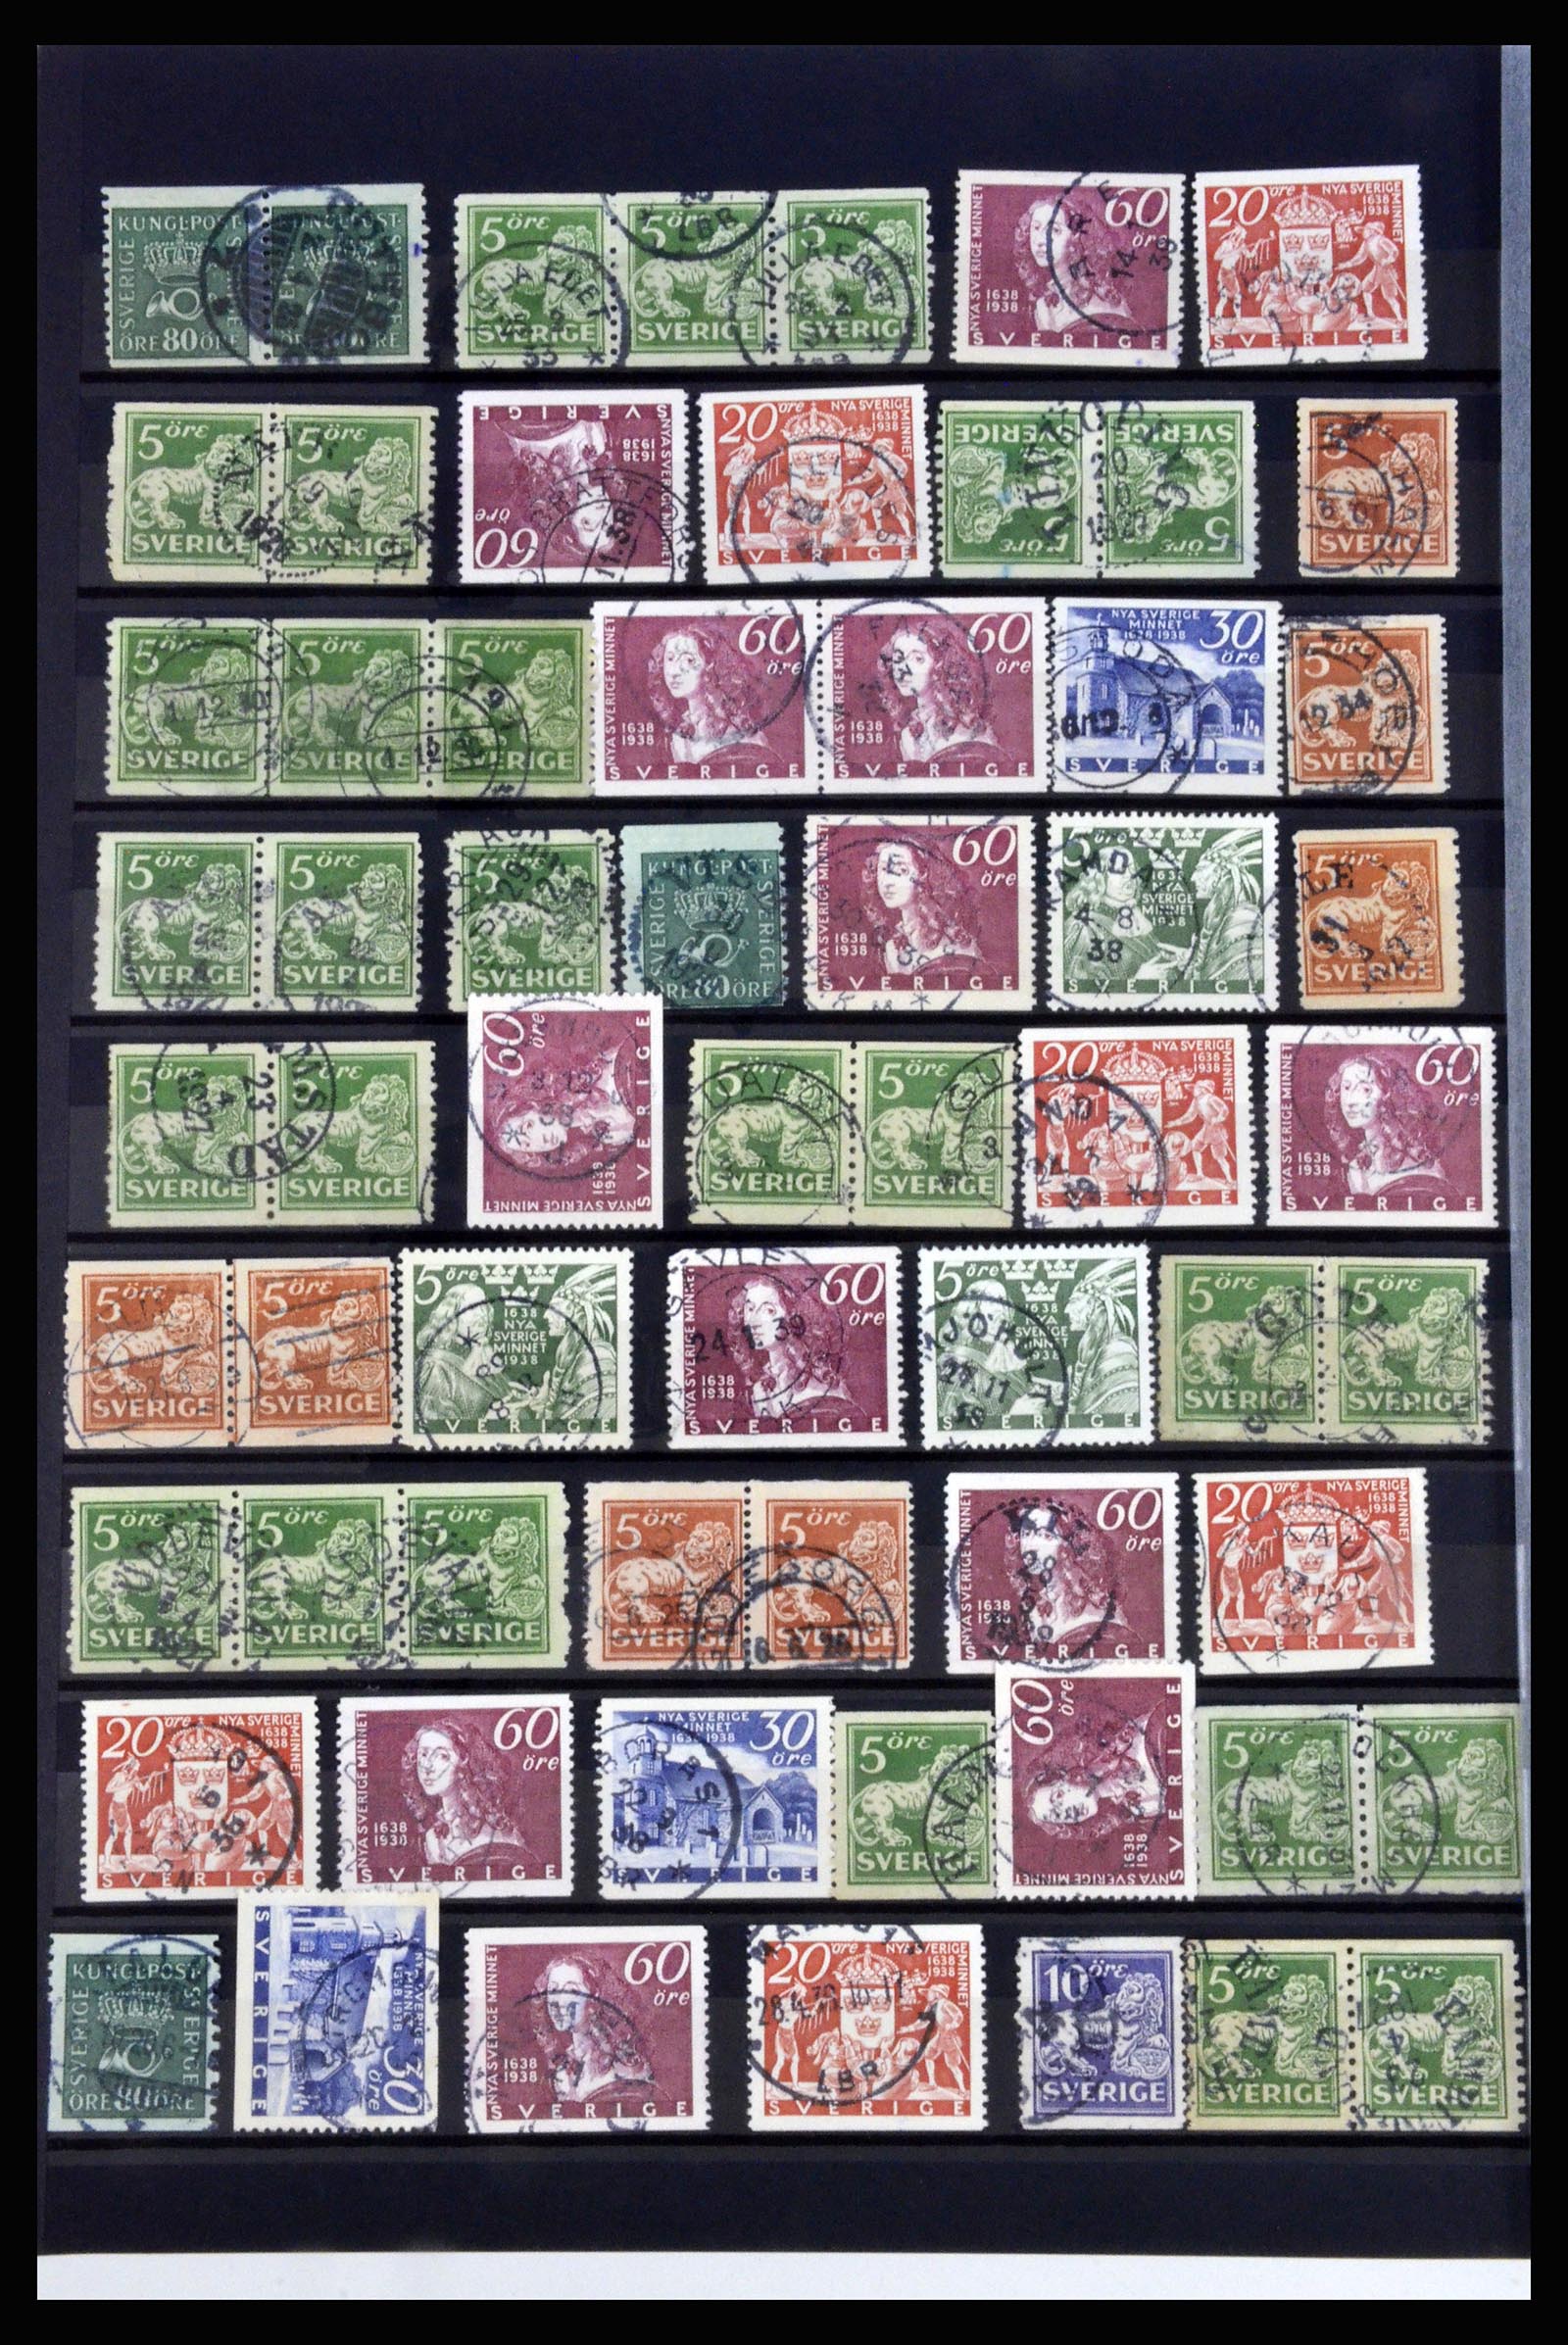 36316 044 - Stamp collection 36316 Sweden cancellations 1920-1938.